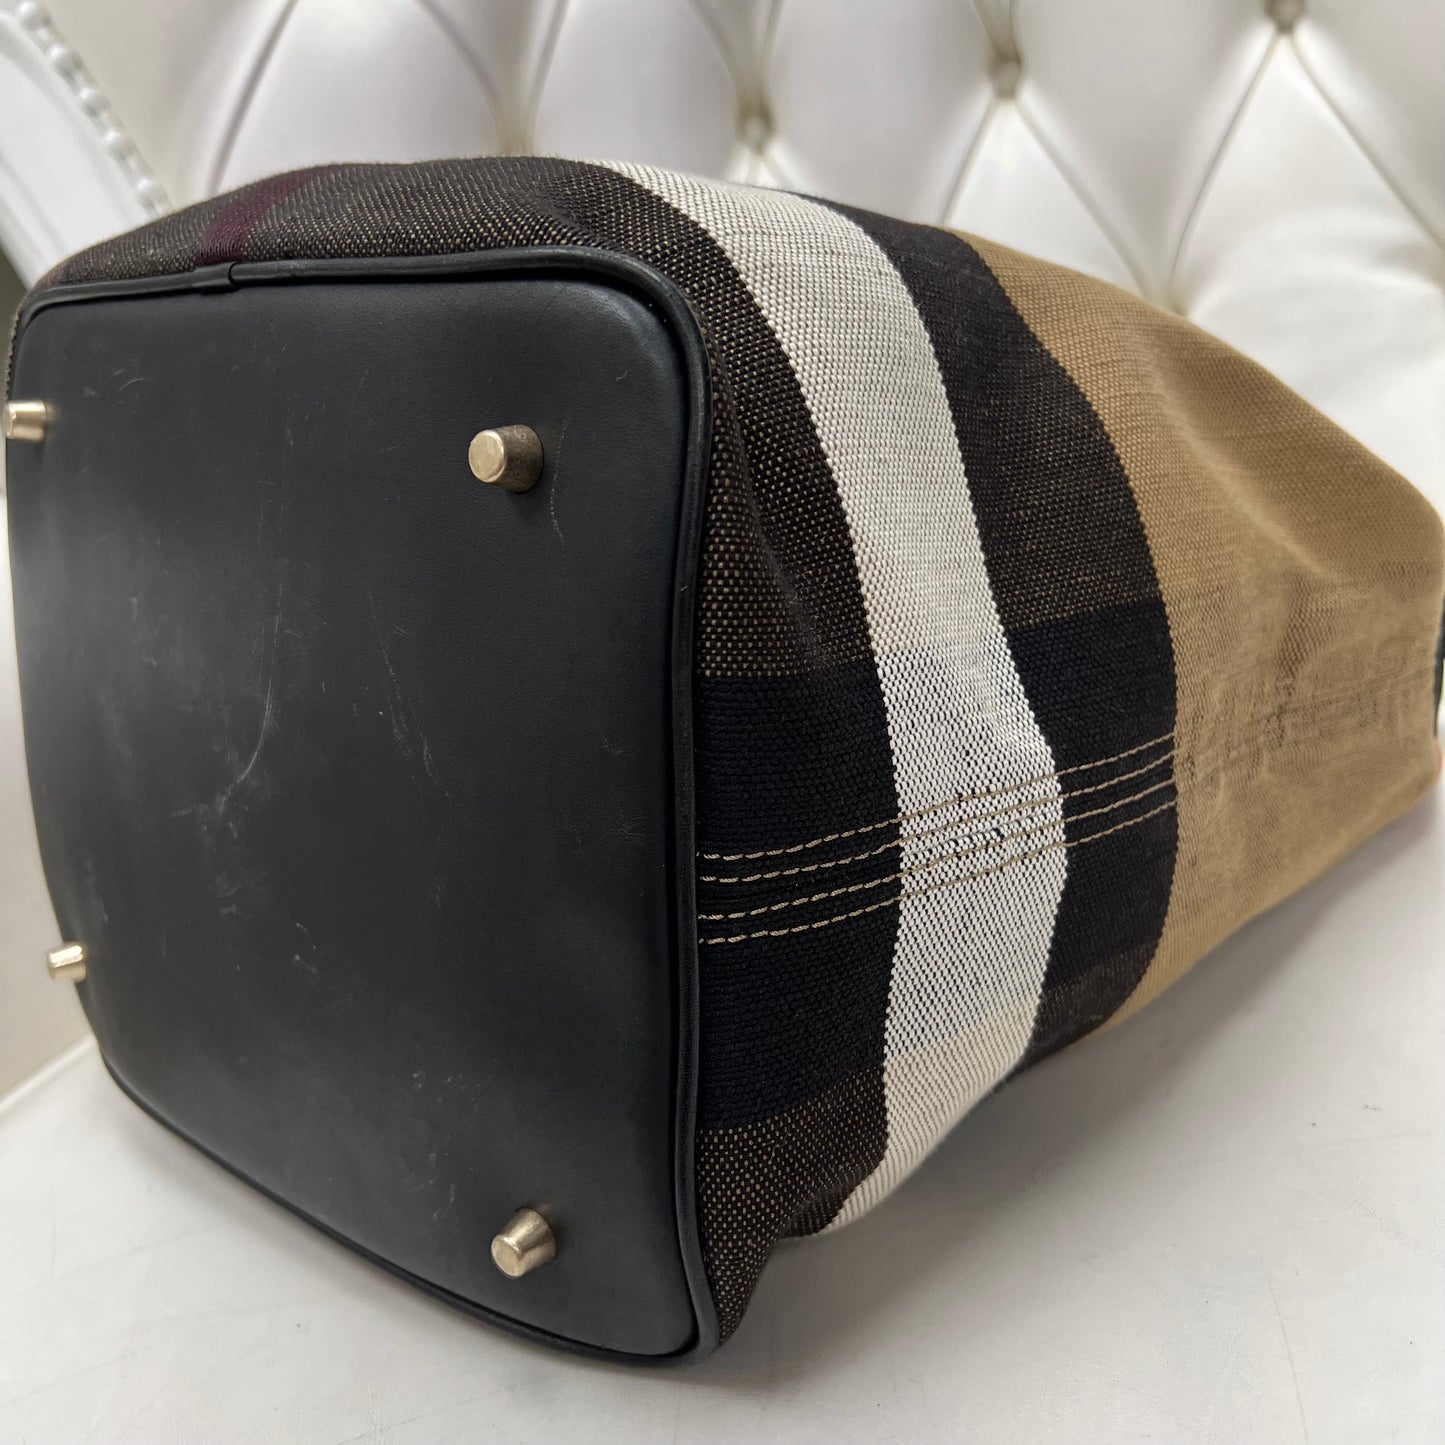 Burberry Bucket Bag with Pouch